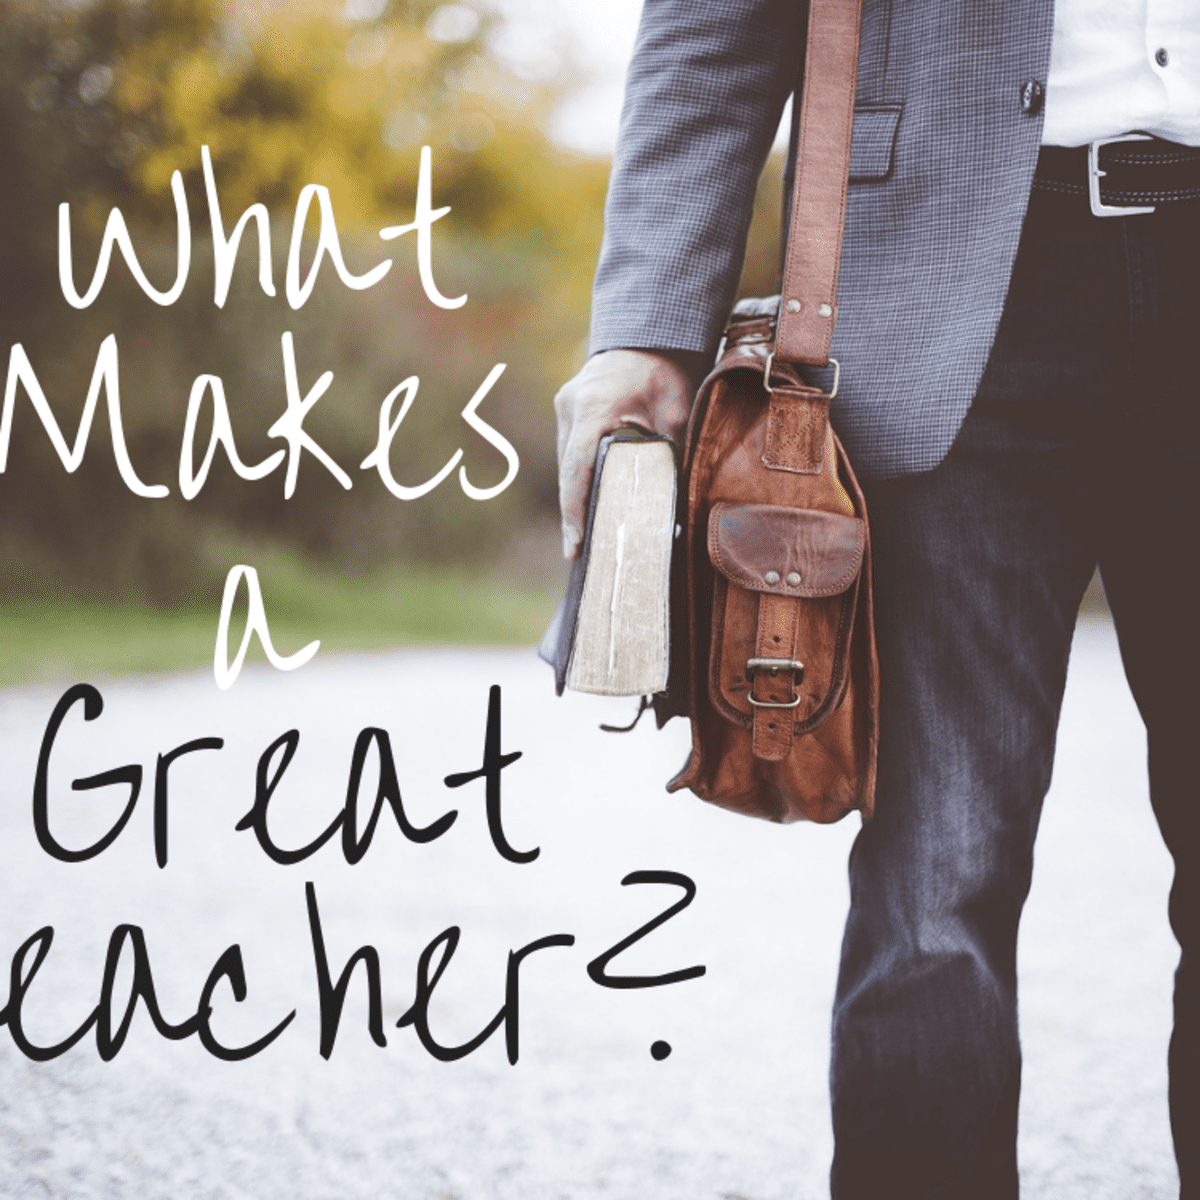 What are your three most important reasons for wanting to be a teacher?